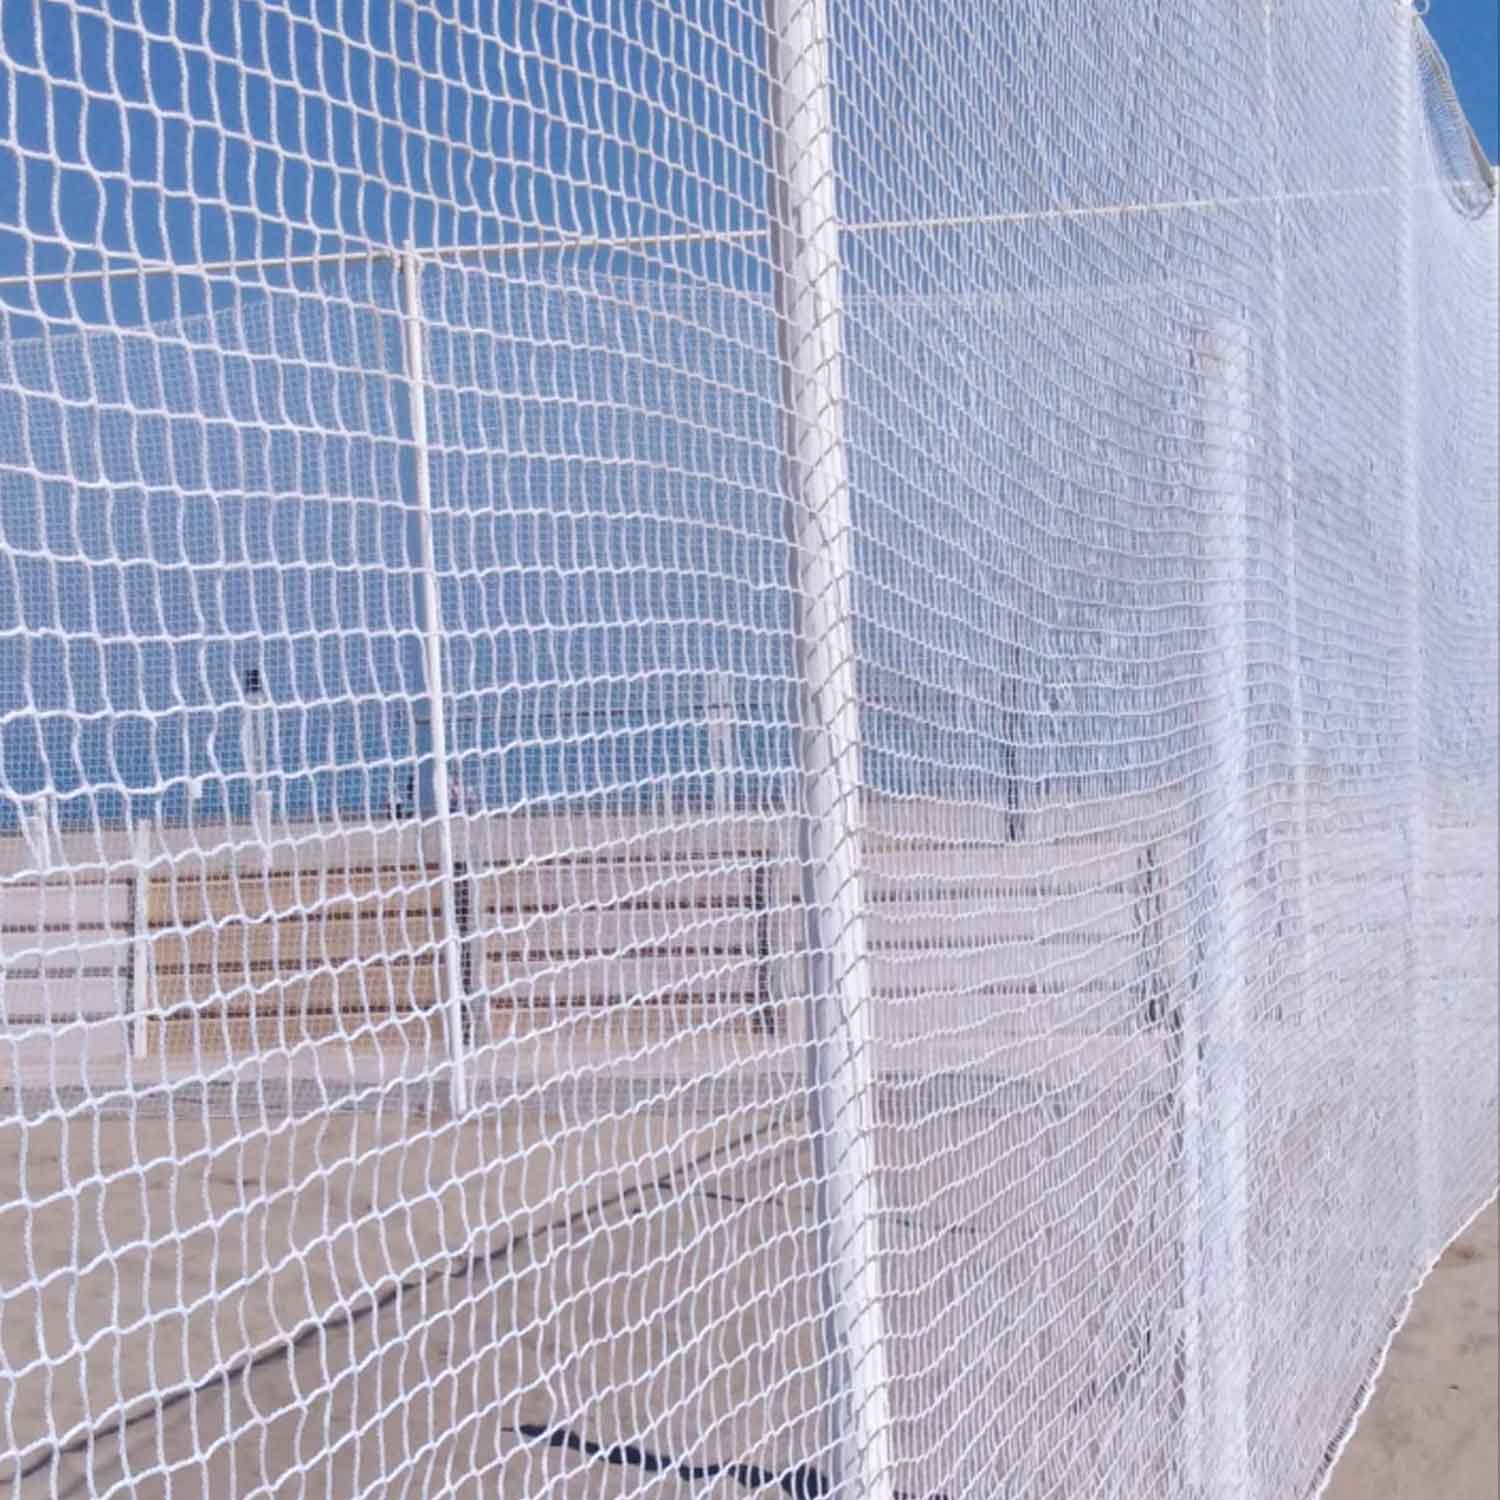 Fence nets for beach sports